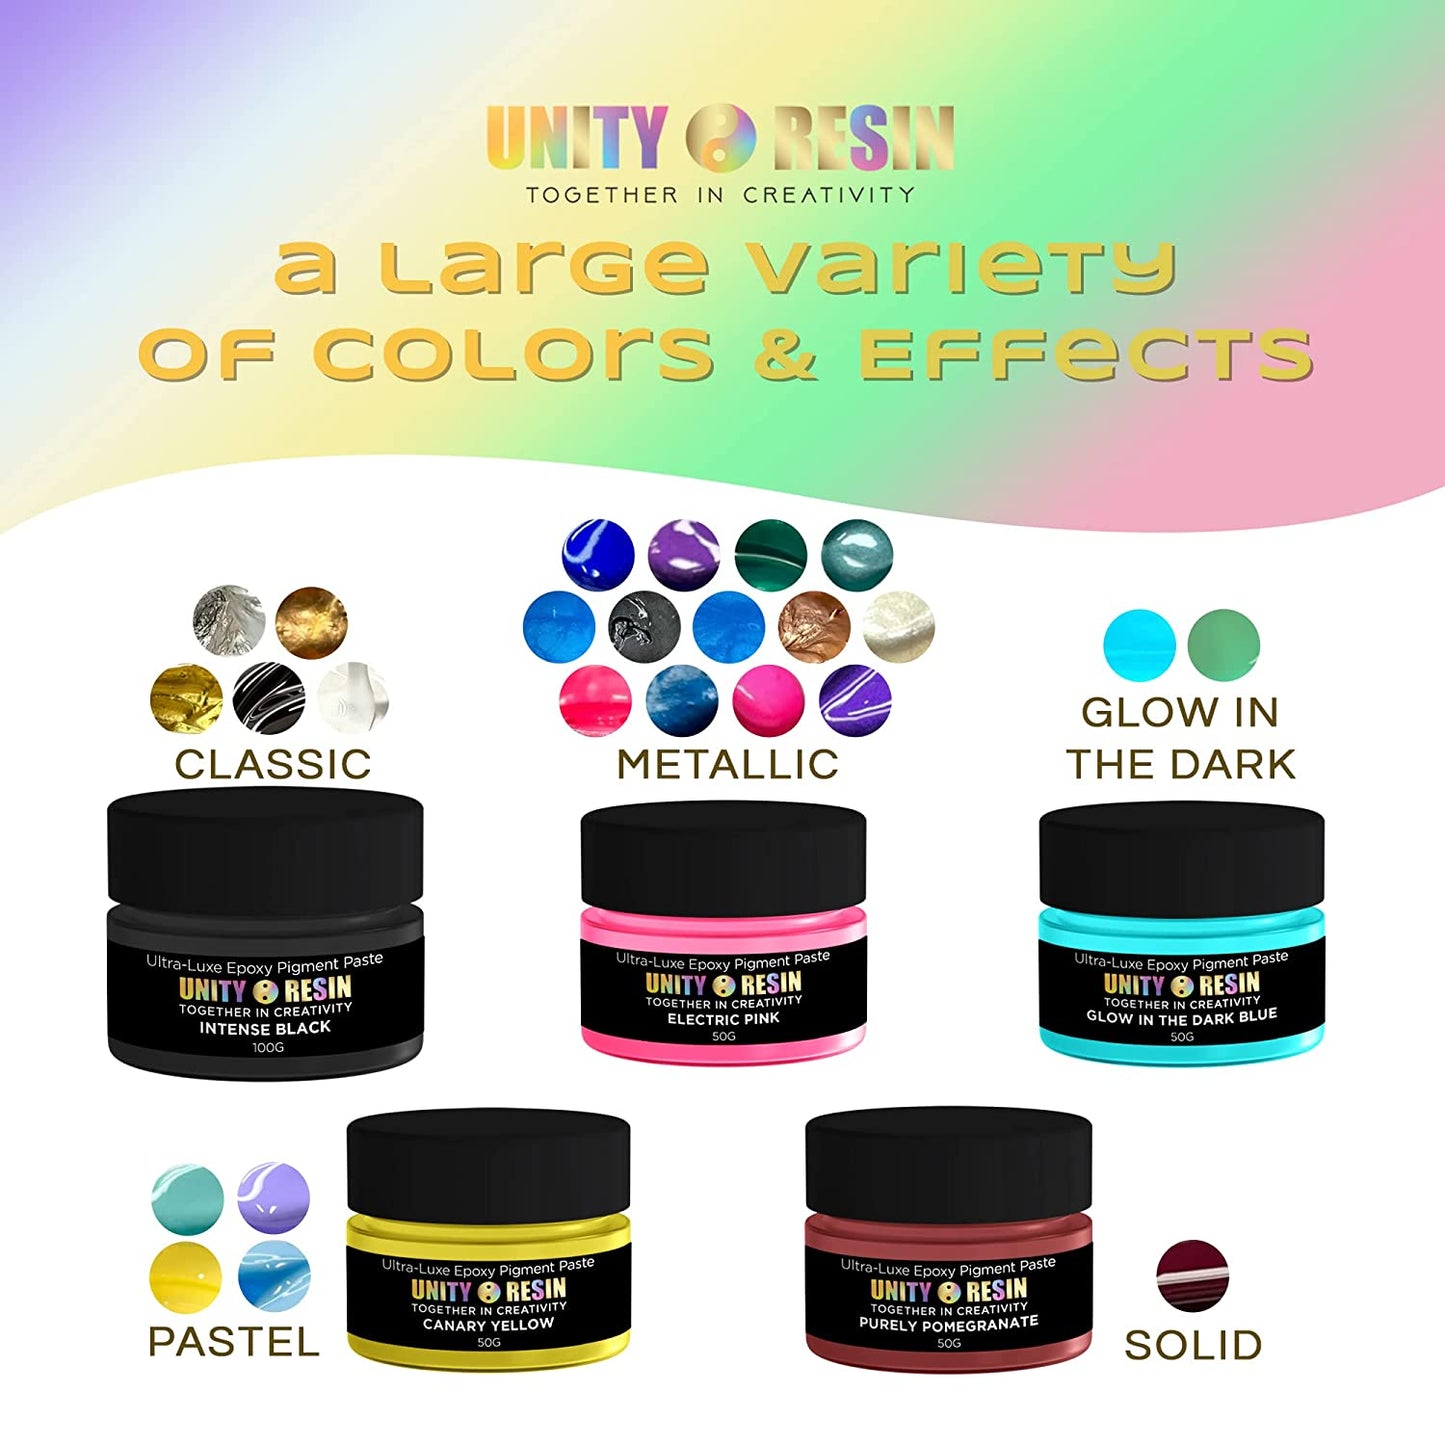 Ultra-Luxe Epoxy Resin Pigment Paste- LUX ROSE (50G).